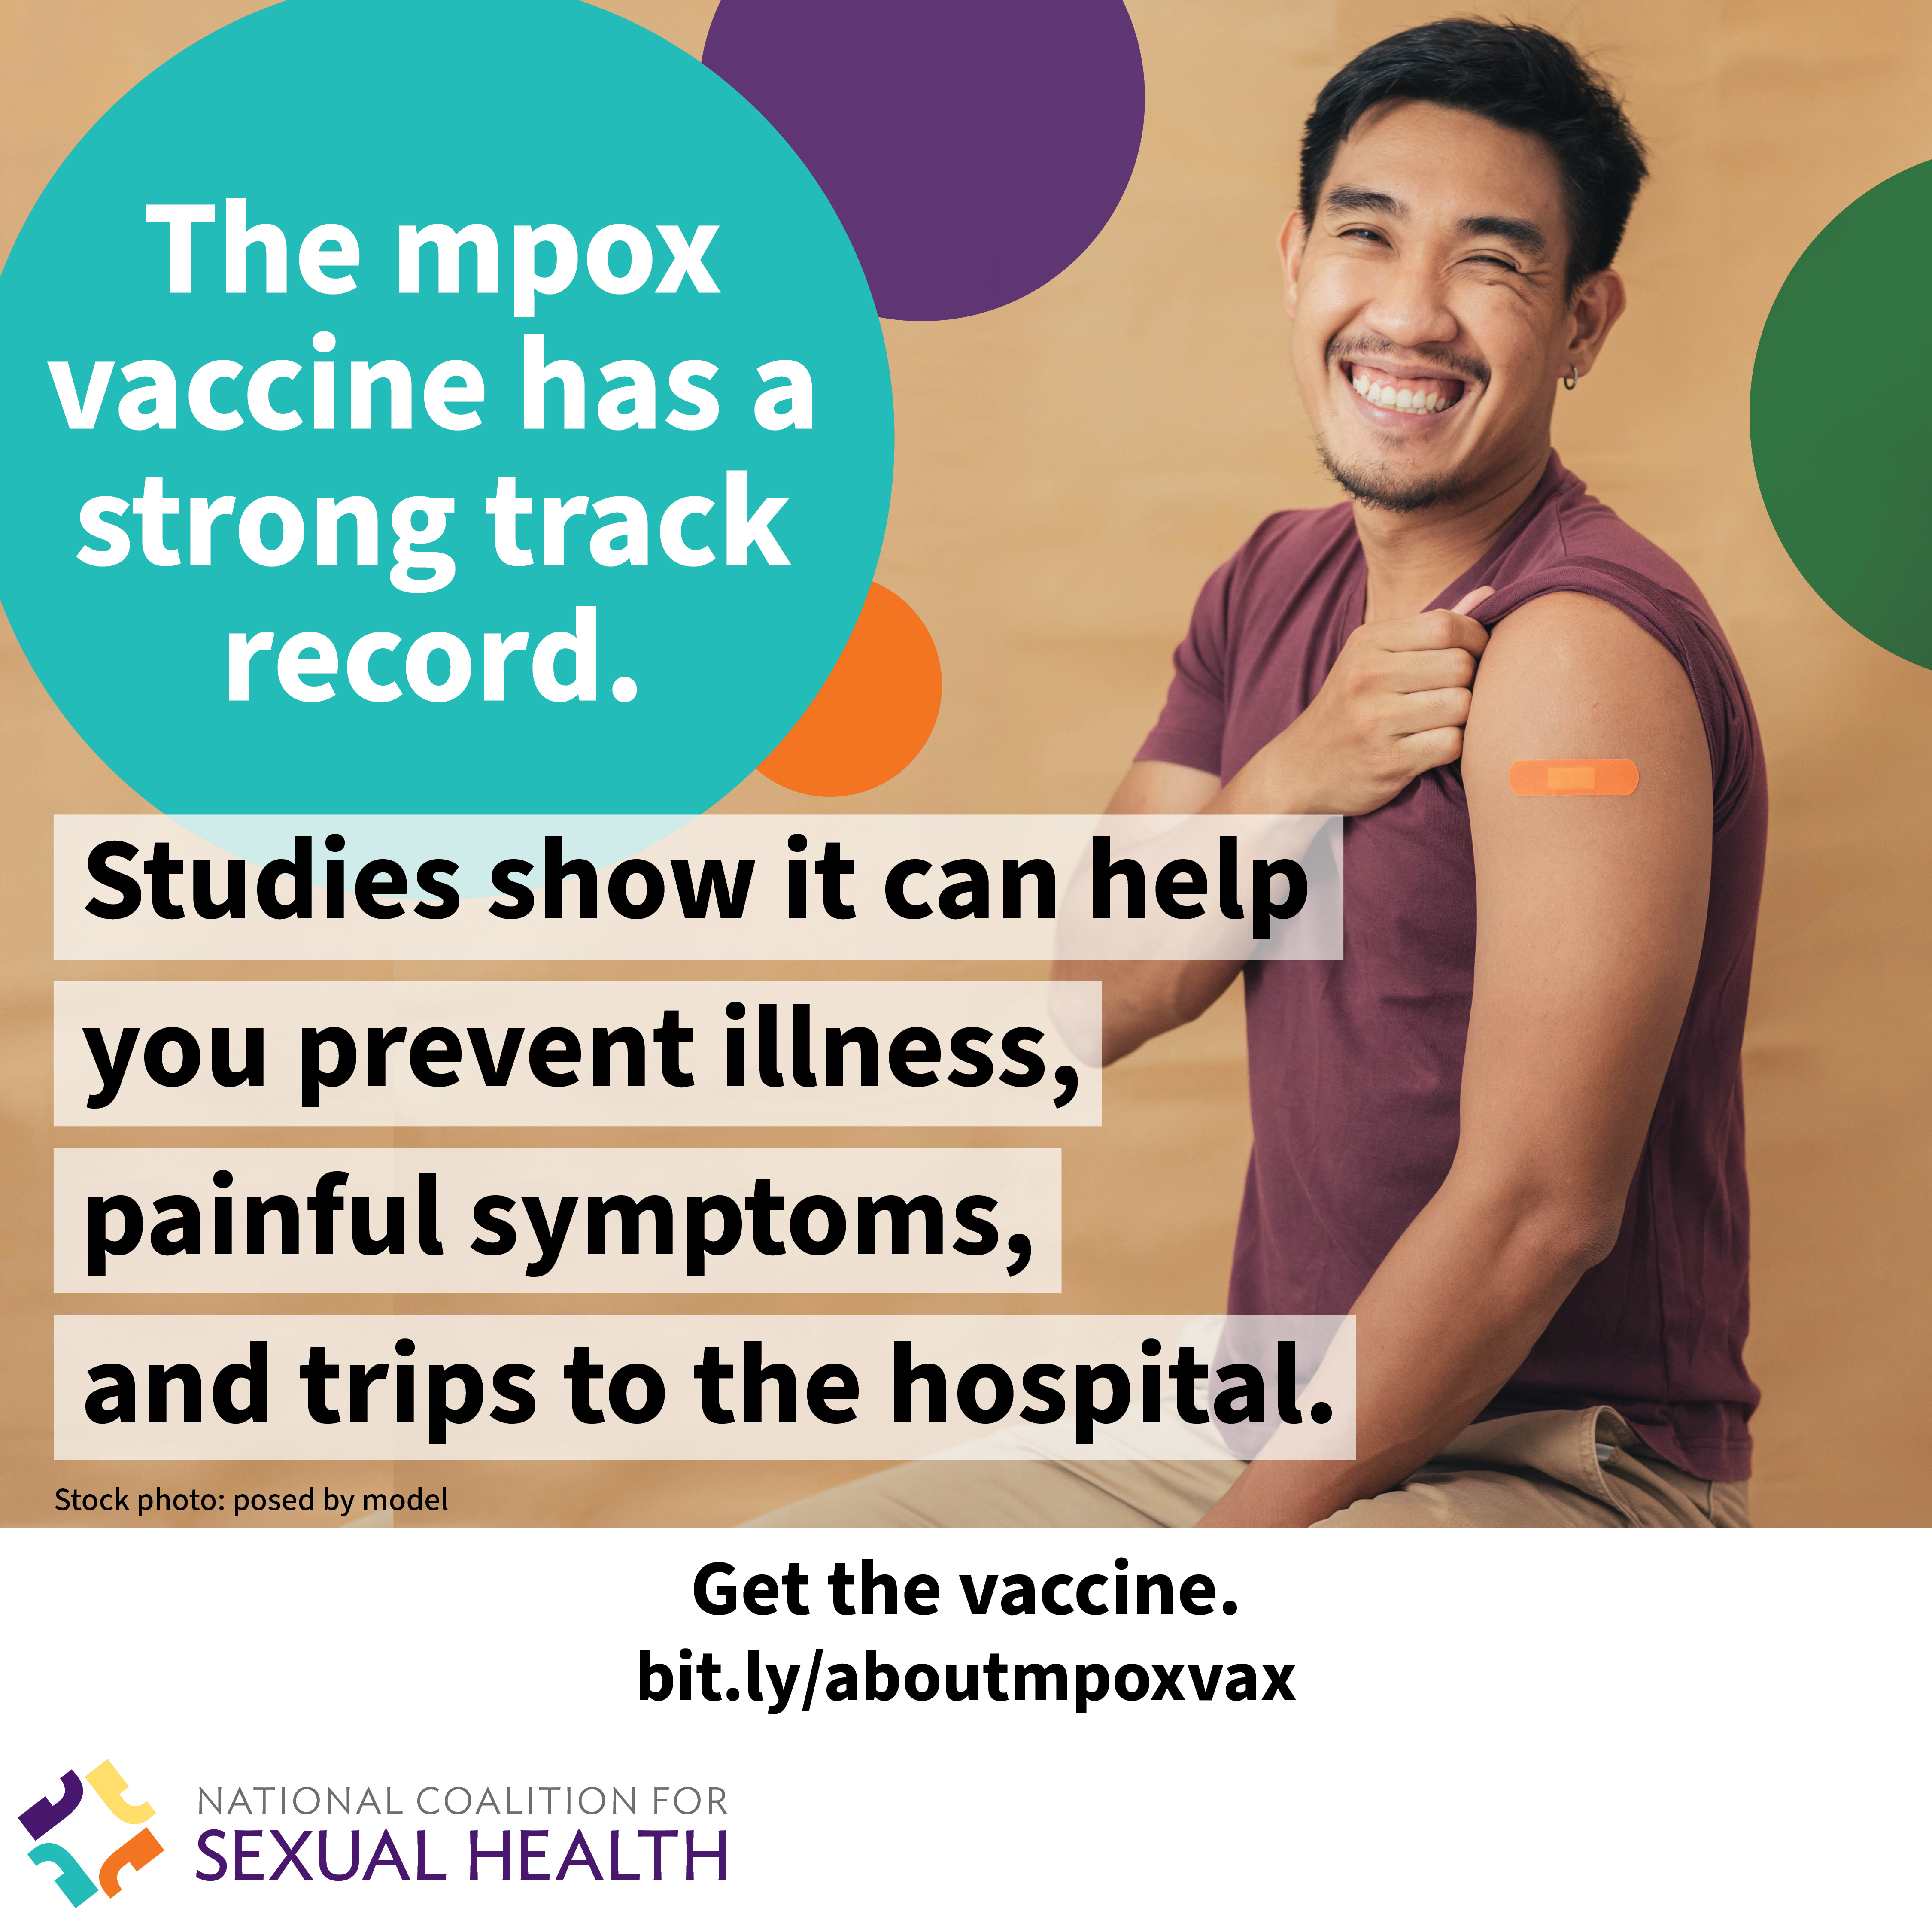 A young adult wearing a sleeveless white t-shirt smiles and reveals a bandage on their upper arm with the sleeve of their over shirt pulled down. Text: The mpox vaccine has a strong track record. Studies show it can help you prevent illness, painful symptoms, and trips to the hospital. Start the vaccine now. bit.ly/aboutmpoxvax. Logo:  National Coalition for Sexual Health.